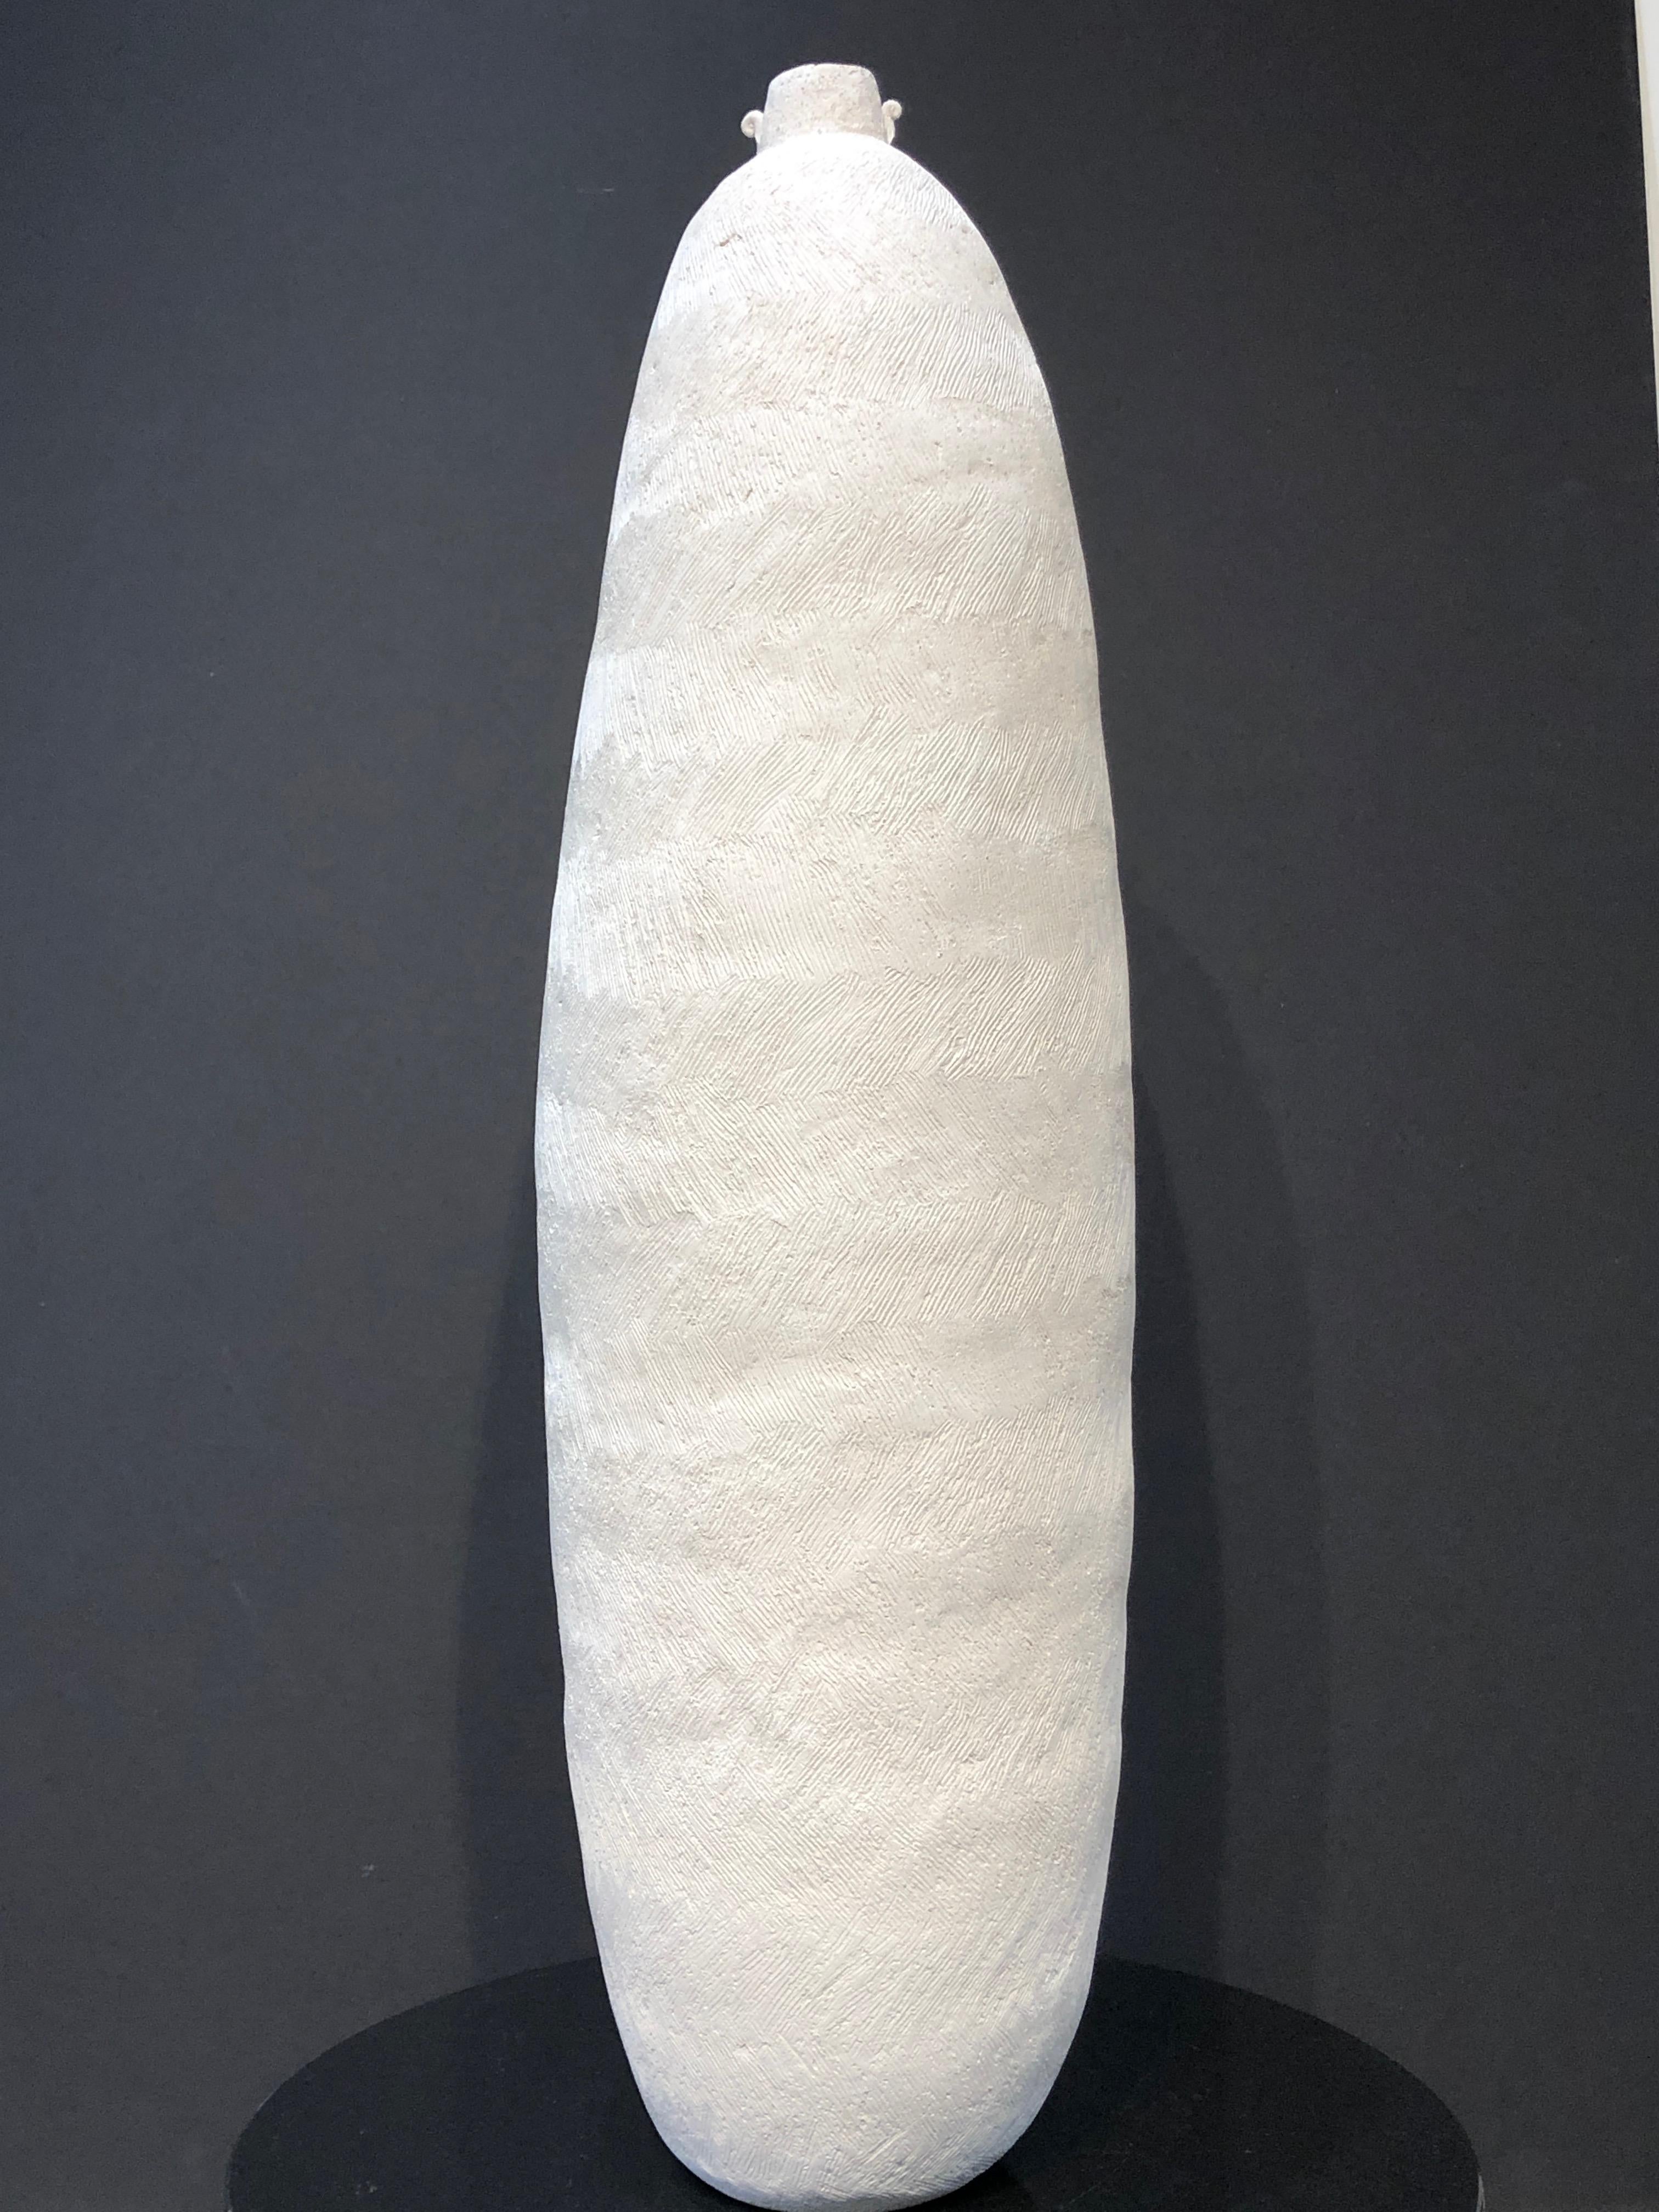 Wi Taepa Abstract Sculpture - Hue, gourd series, white ceramic abstract gourd, vertical, contemporary, Maori